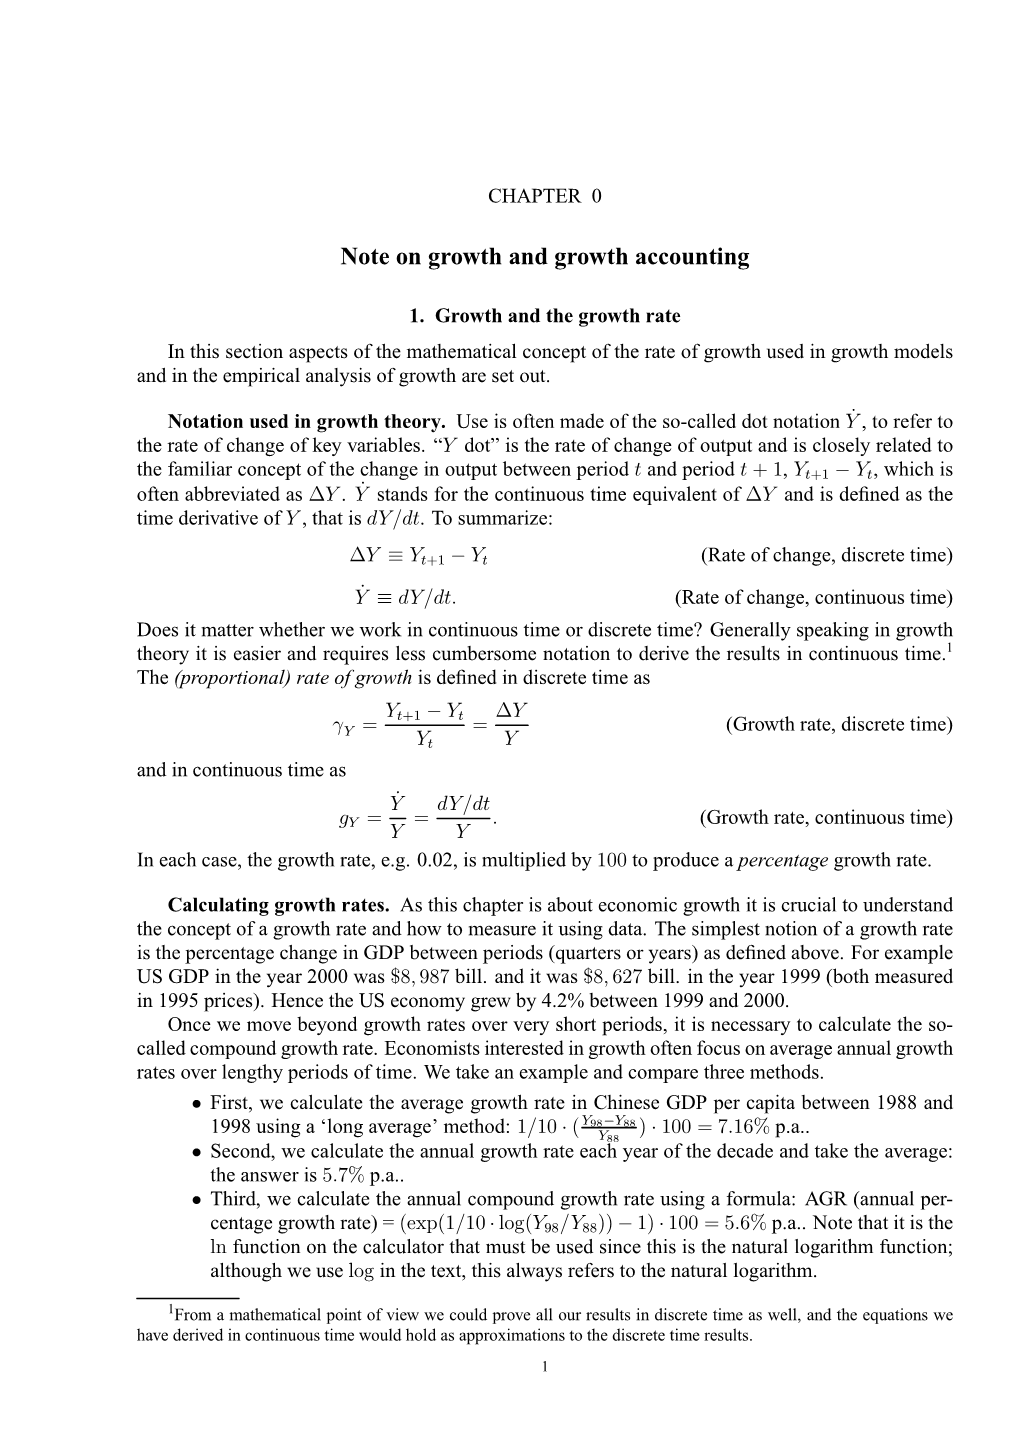 Note on Growth and Growth Accounting